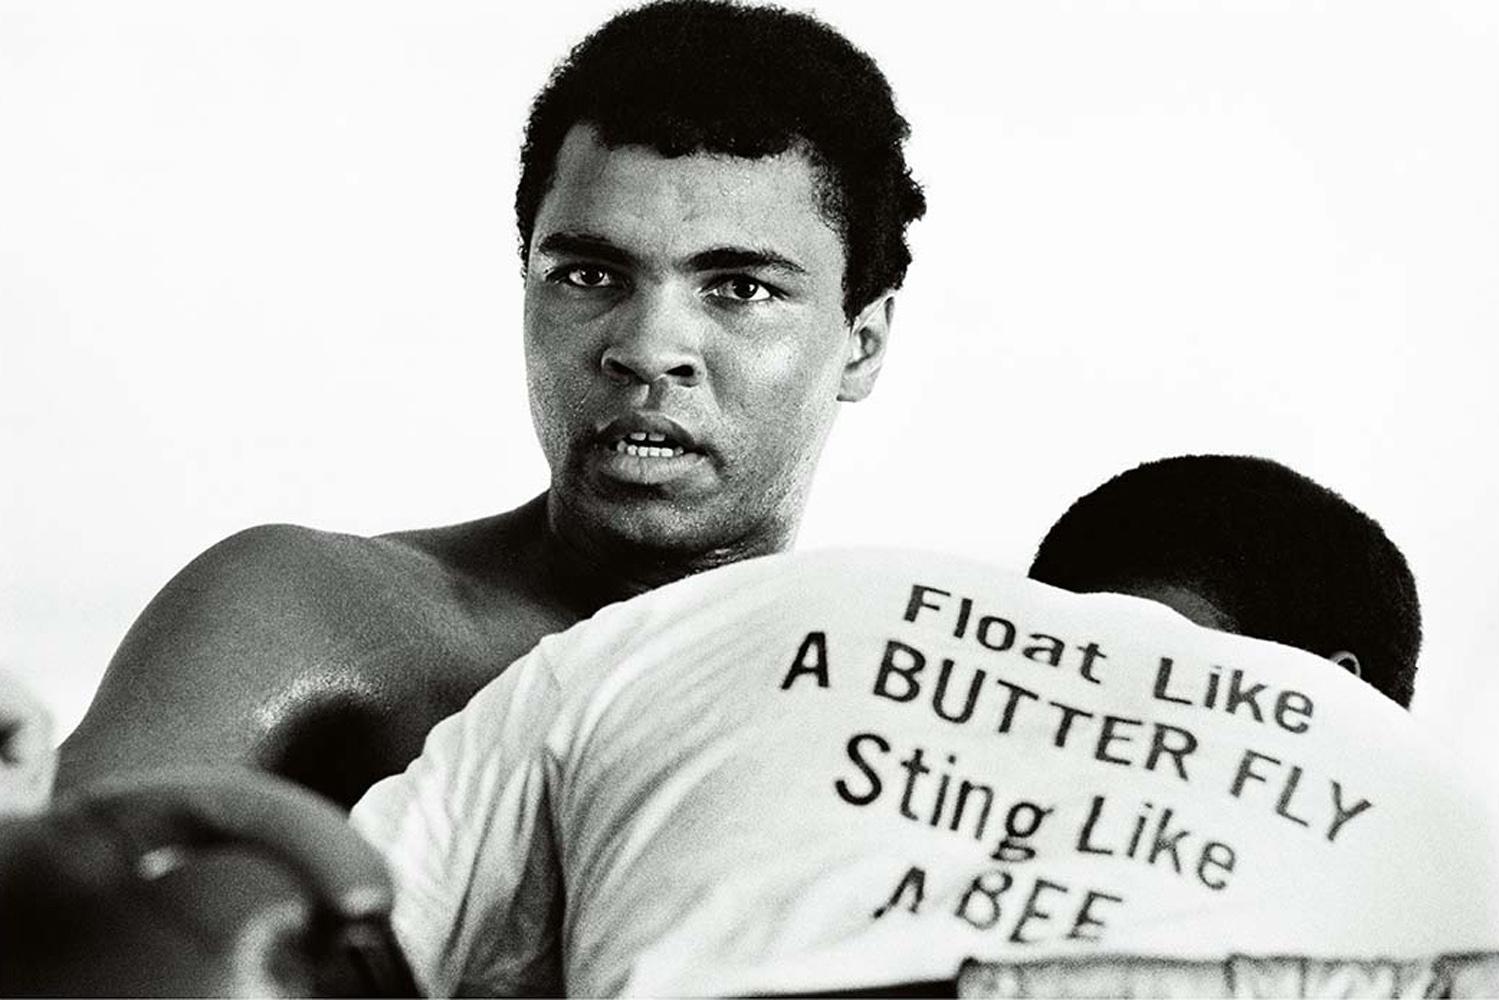 Float Like a Butterfly, Sting Like a Bee - Chris Smith, Muhammad Ali, 34.5x48 in